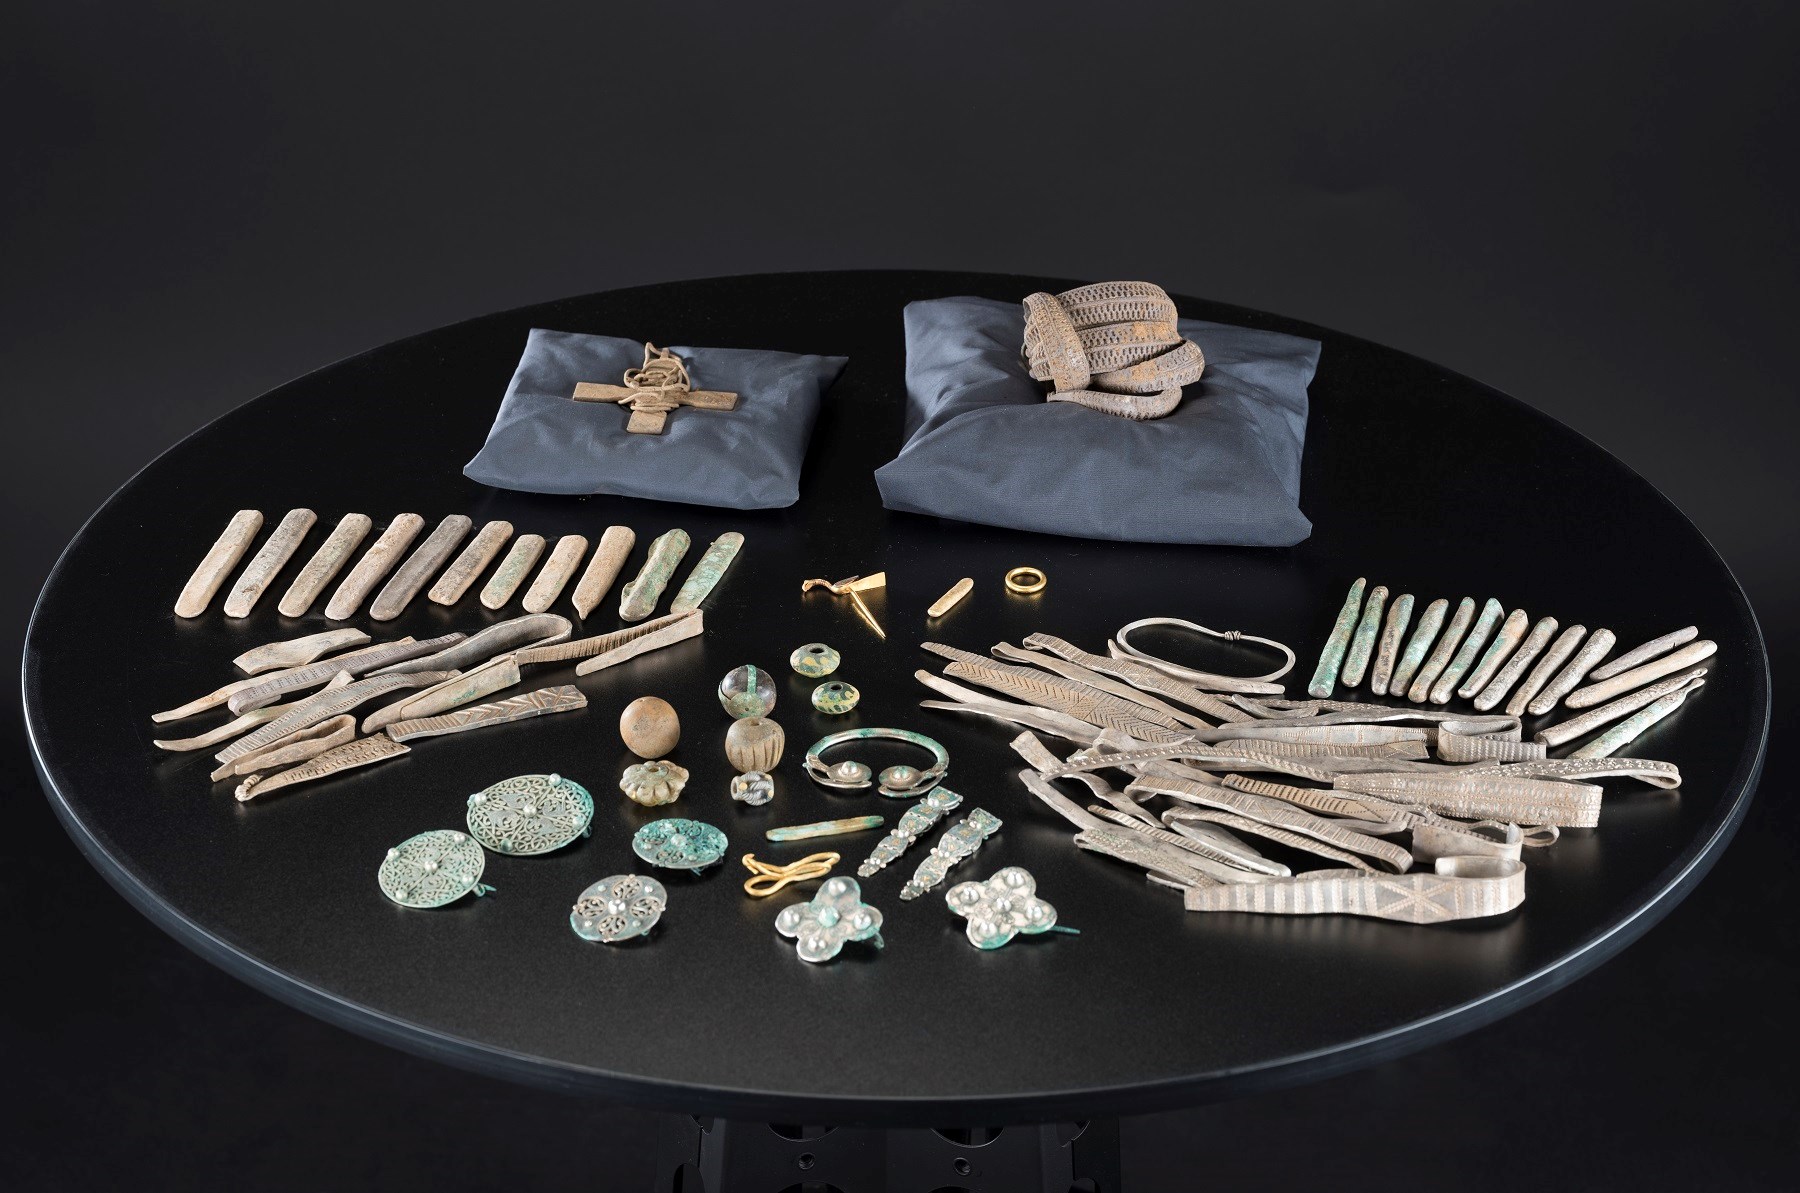 The contents of the hoard are laid out on a black table. Pillows prop up the cross and arm-ring bundle with the rest organised by object type.